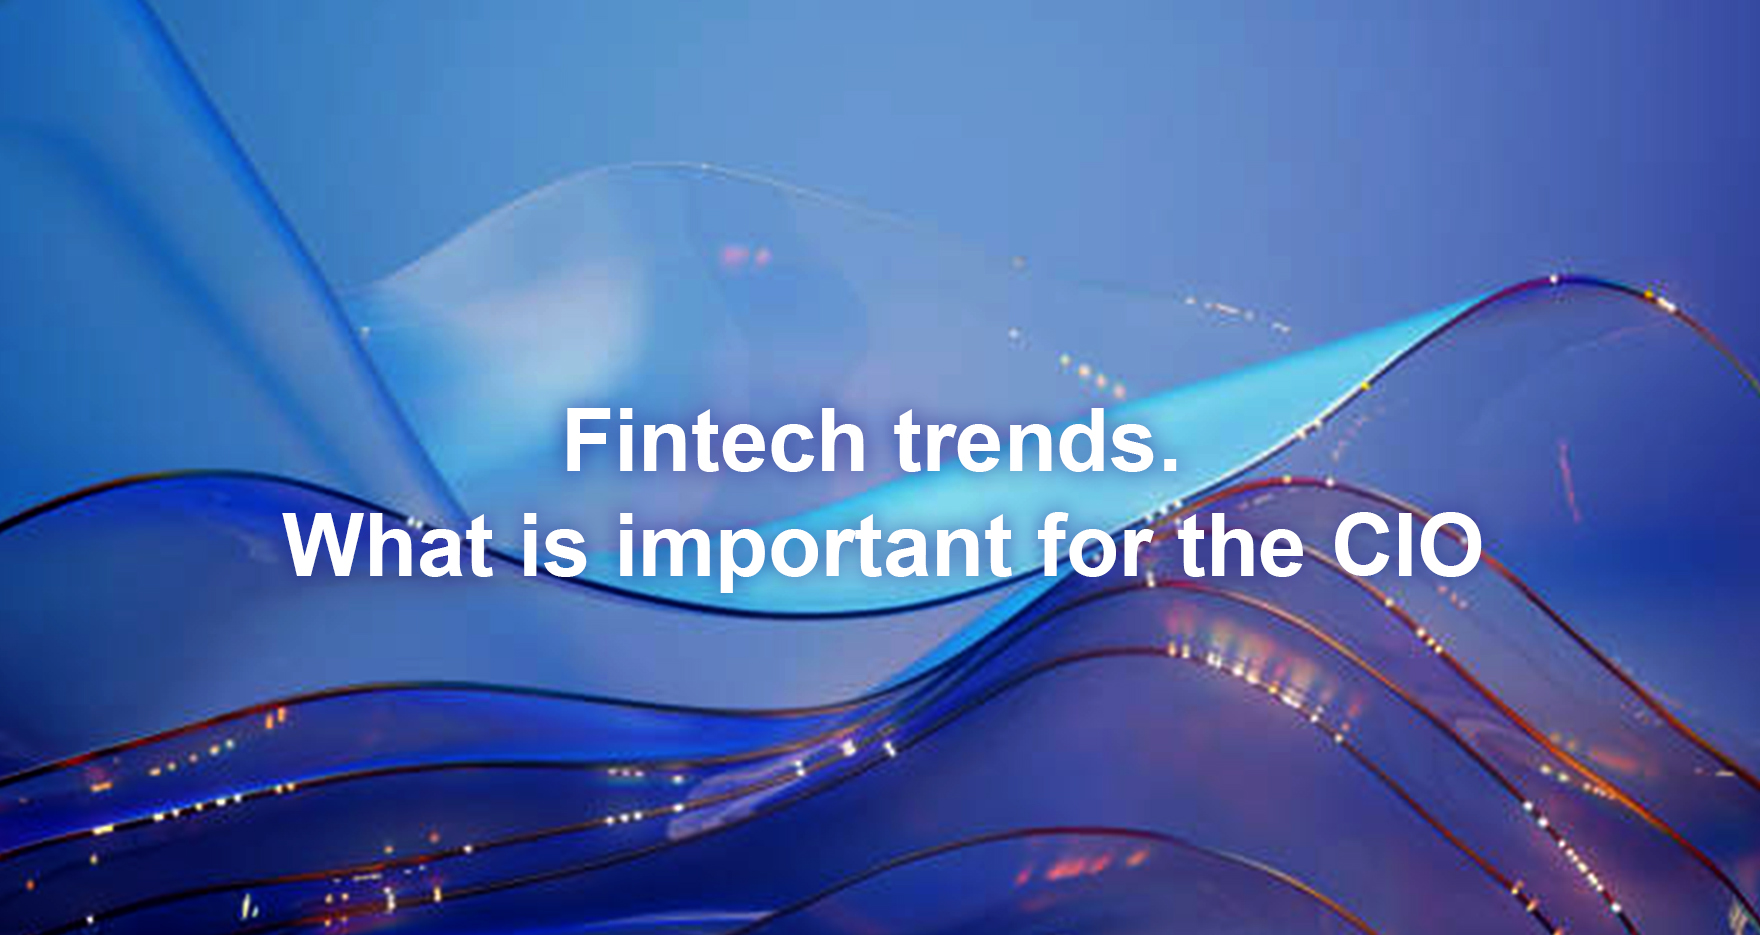 Key trends shaping the future of global fintech